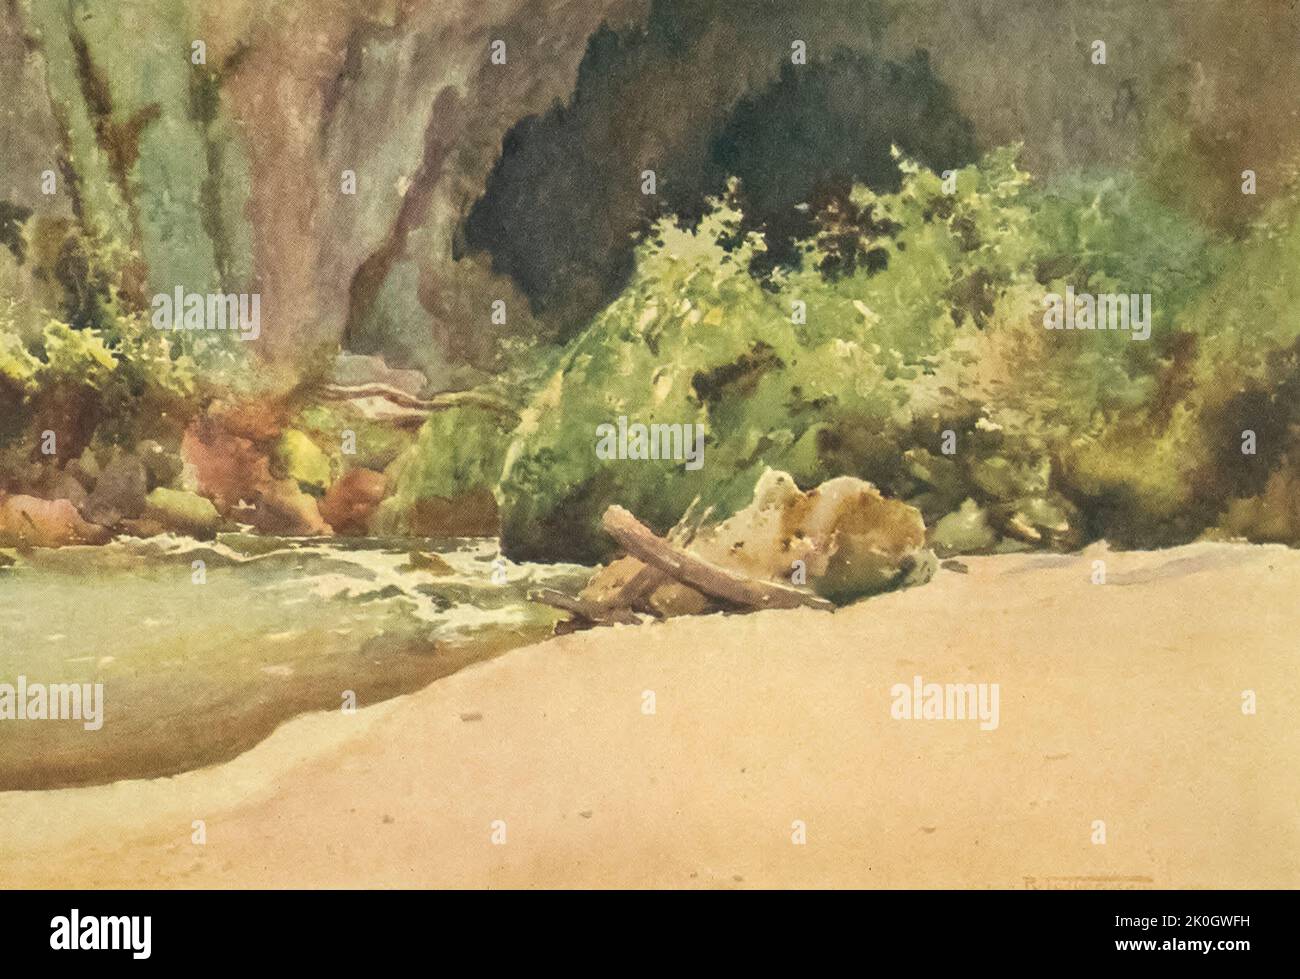 The Bottom of Goekteik Gorge from the book ' Burma ' painted and described by Kelly, R. Talbot (Robert Talbot), 1861-1934 Publication date 1905 Publisher London : Adam and Charles Black Stock Photo